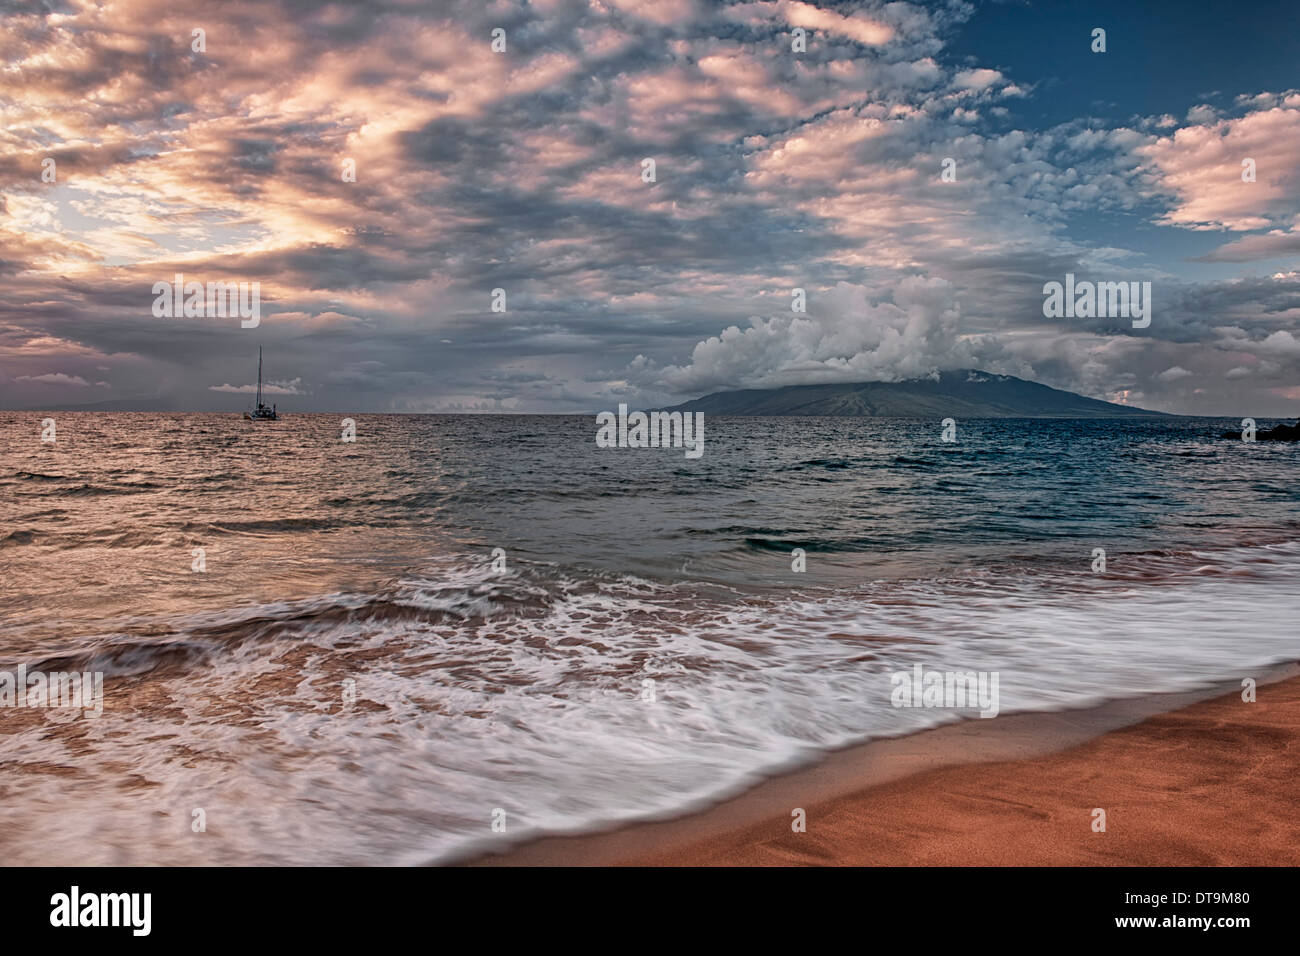 Makena Beach view of spectacular cloud formations at sunset on Hawaii's island of Maui. Stock Photo